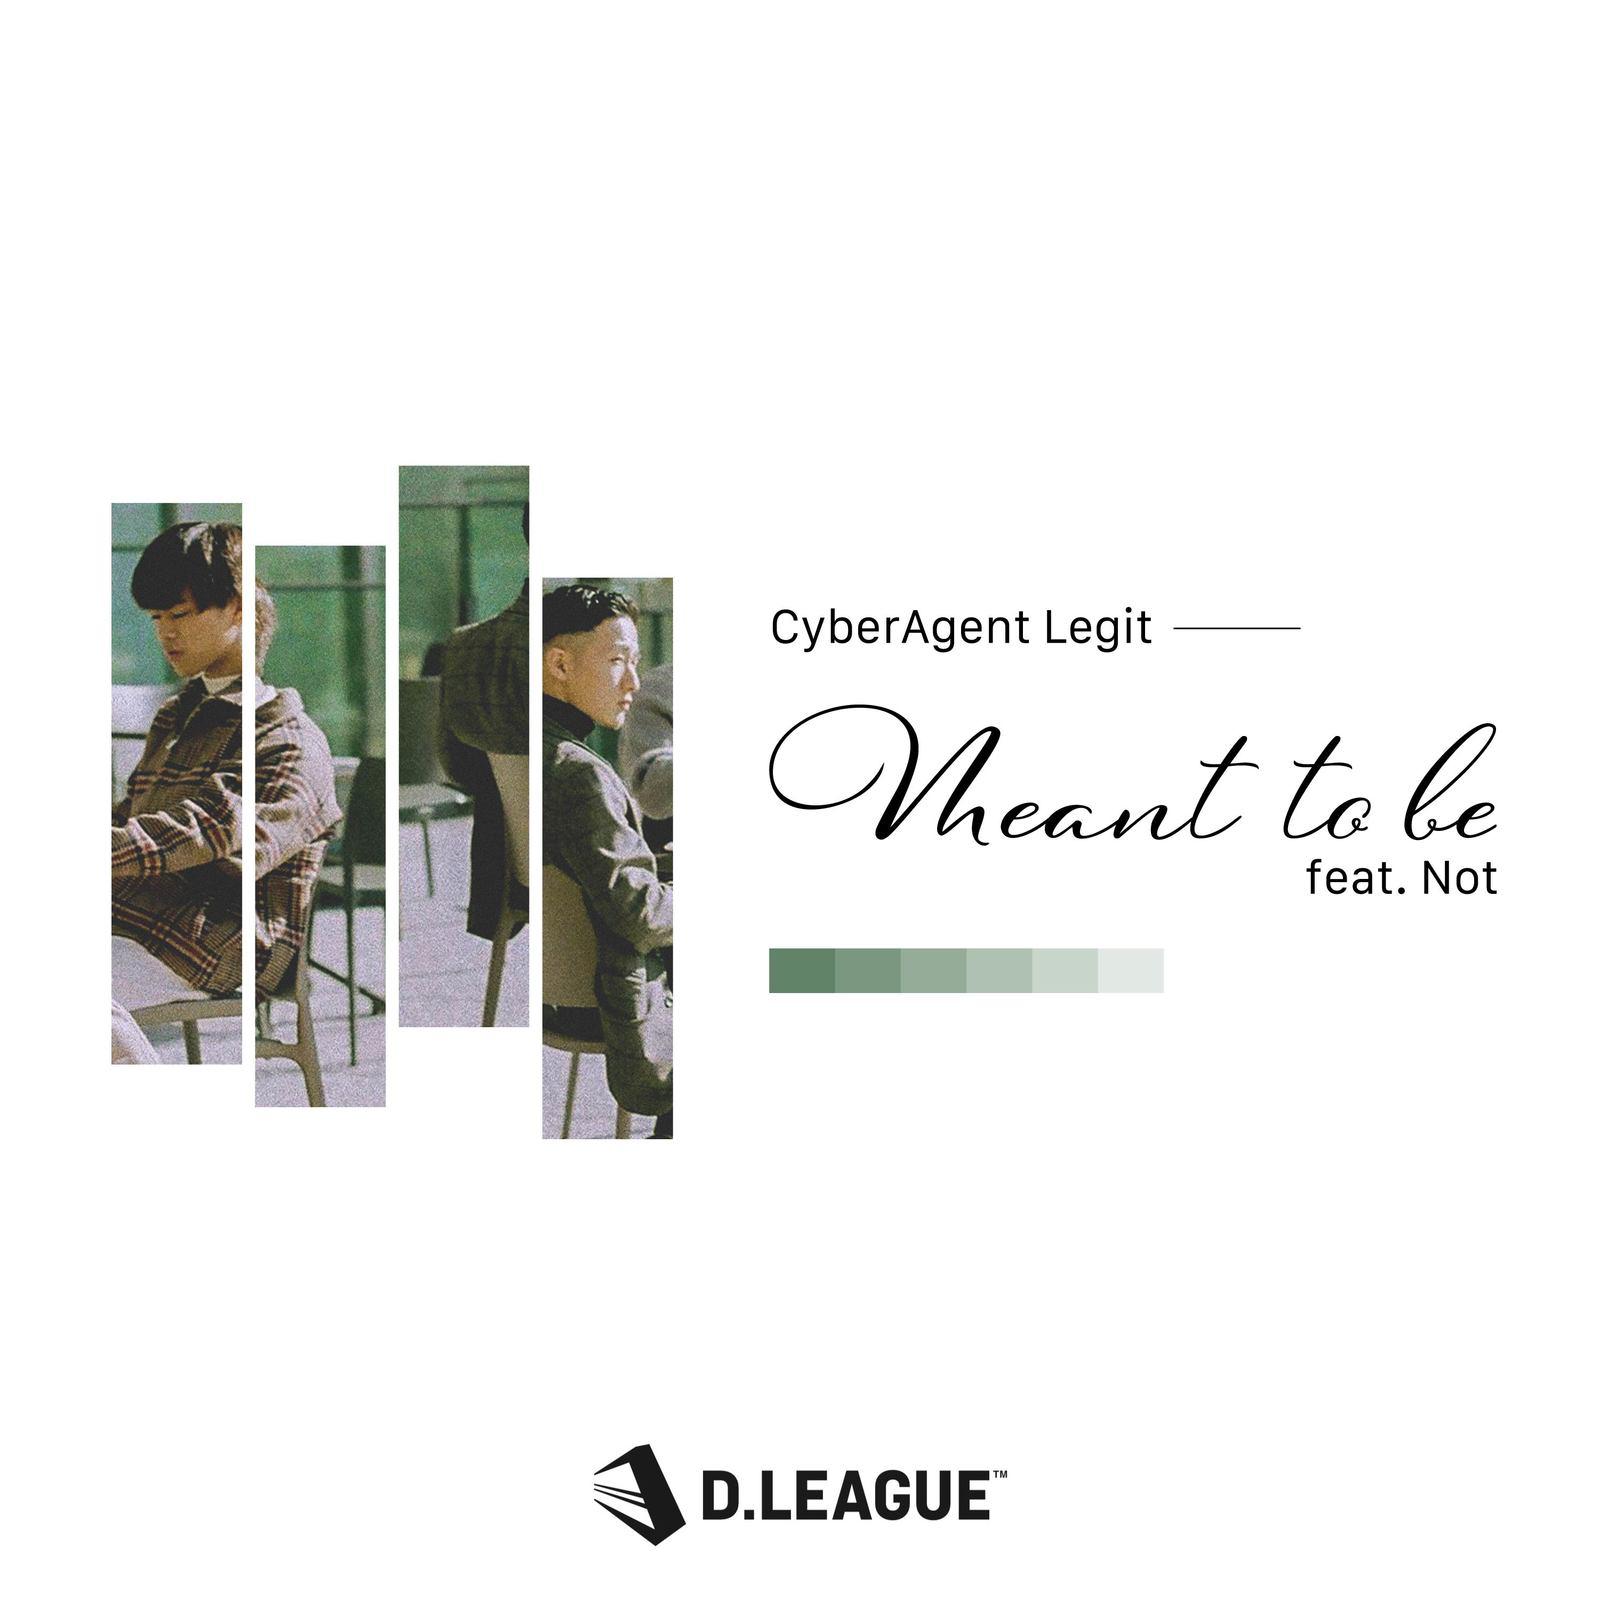 CyberAgent Legit - meant to be (feat. Not)